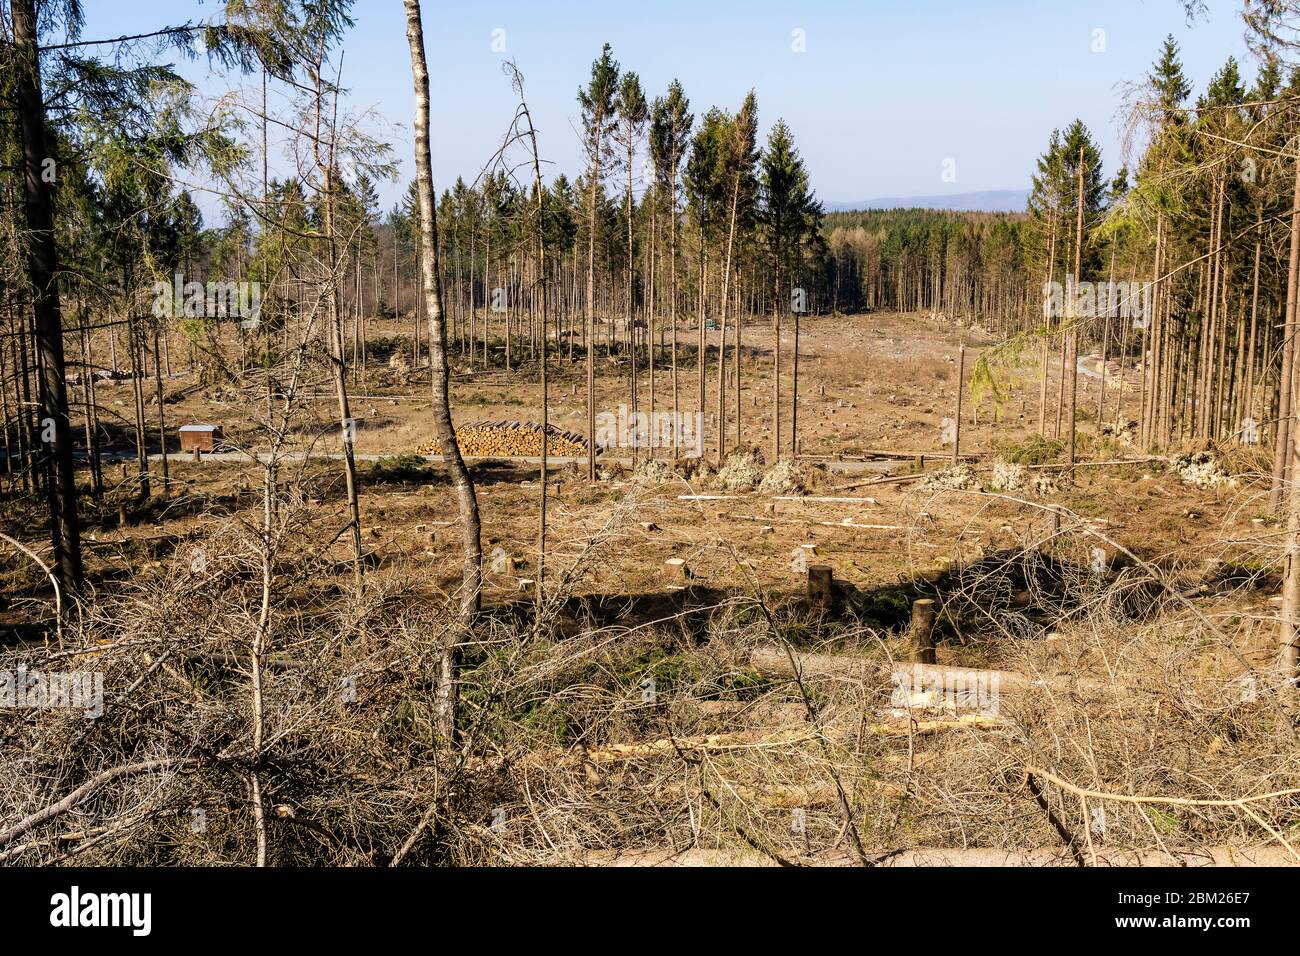 Deforestation of a forest area in Germany damaged by drought and pest infestation Stock Photo